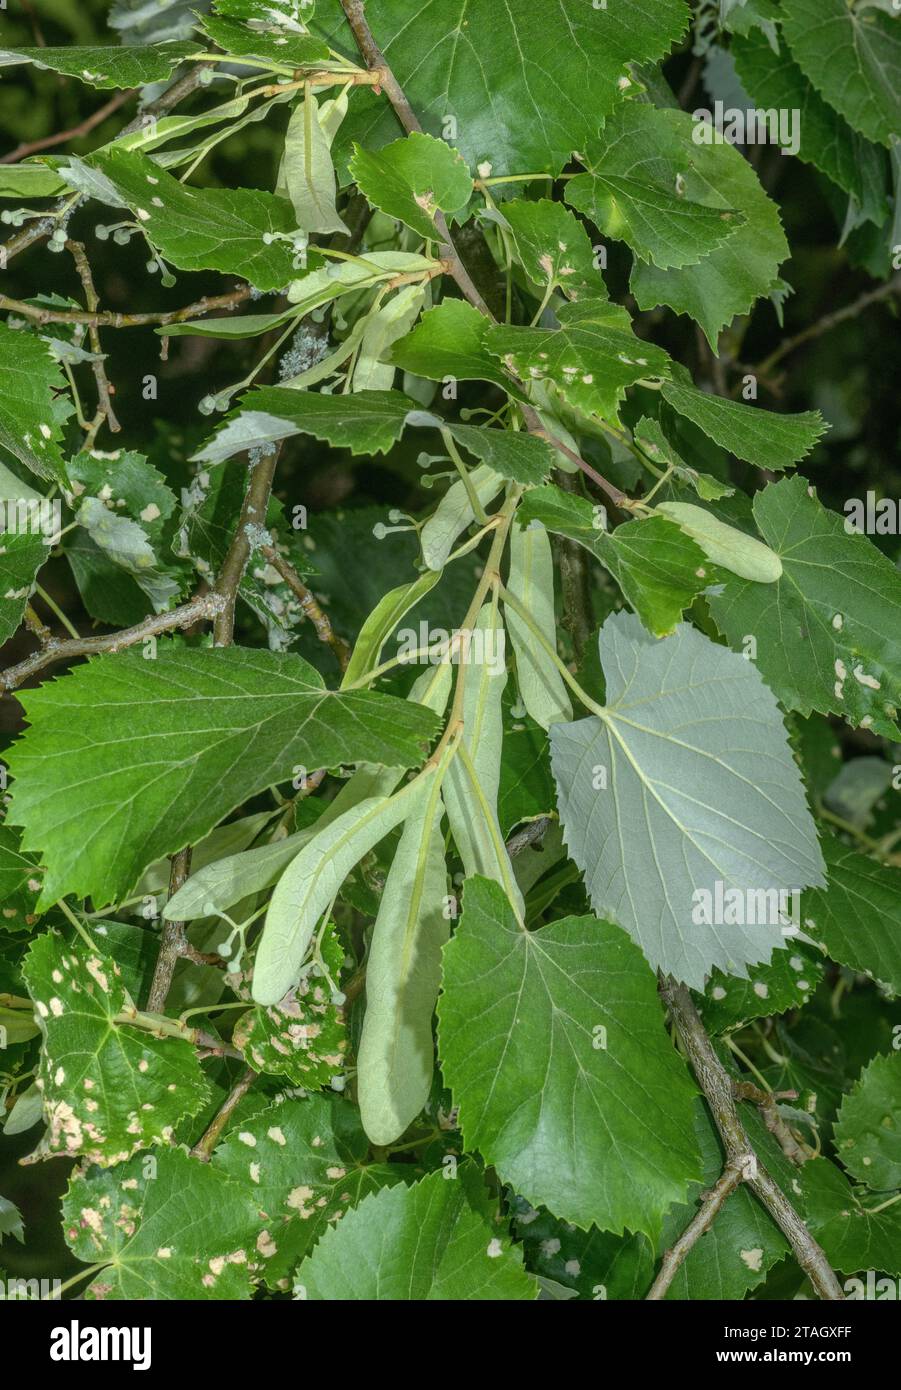 Silver lime, Tilia tomentosa tree, showing leaves and bracts. Stock Photo